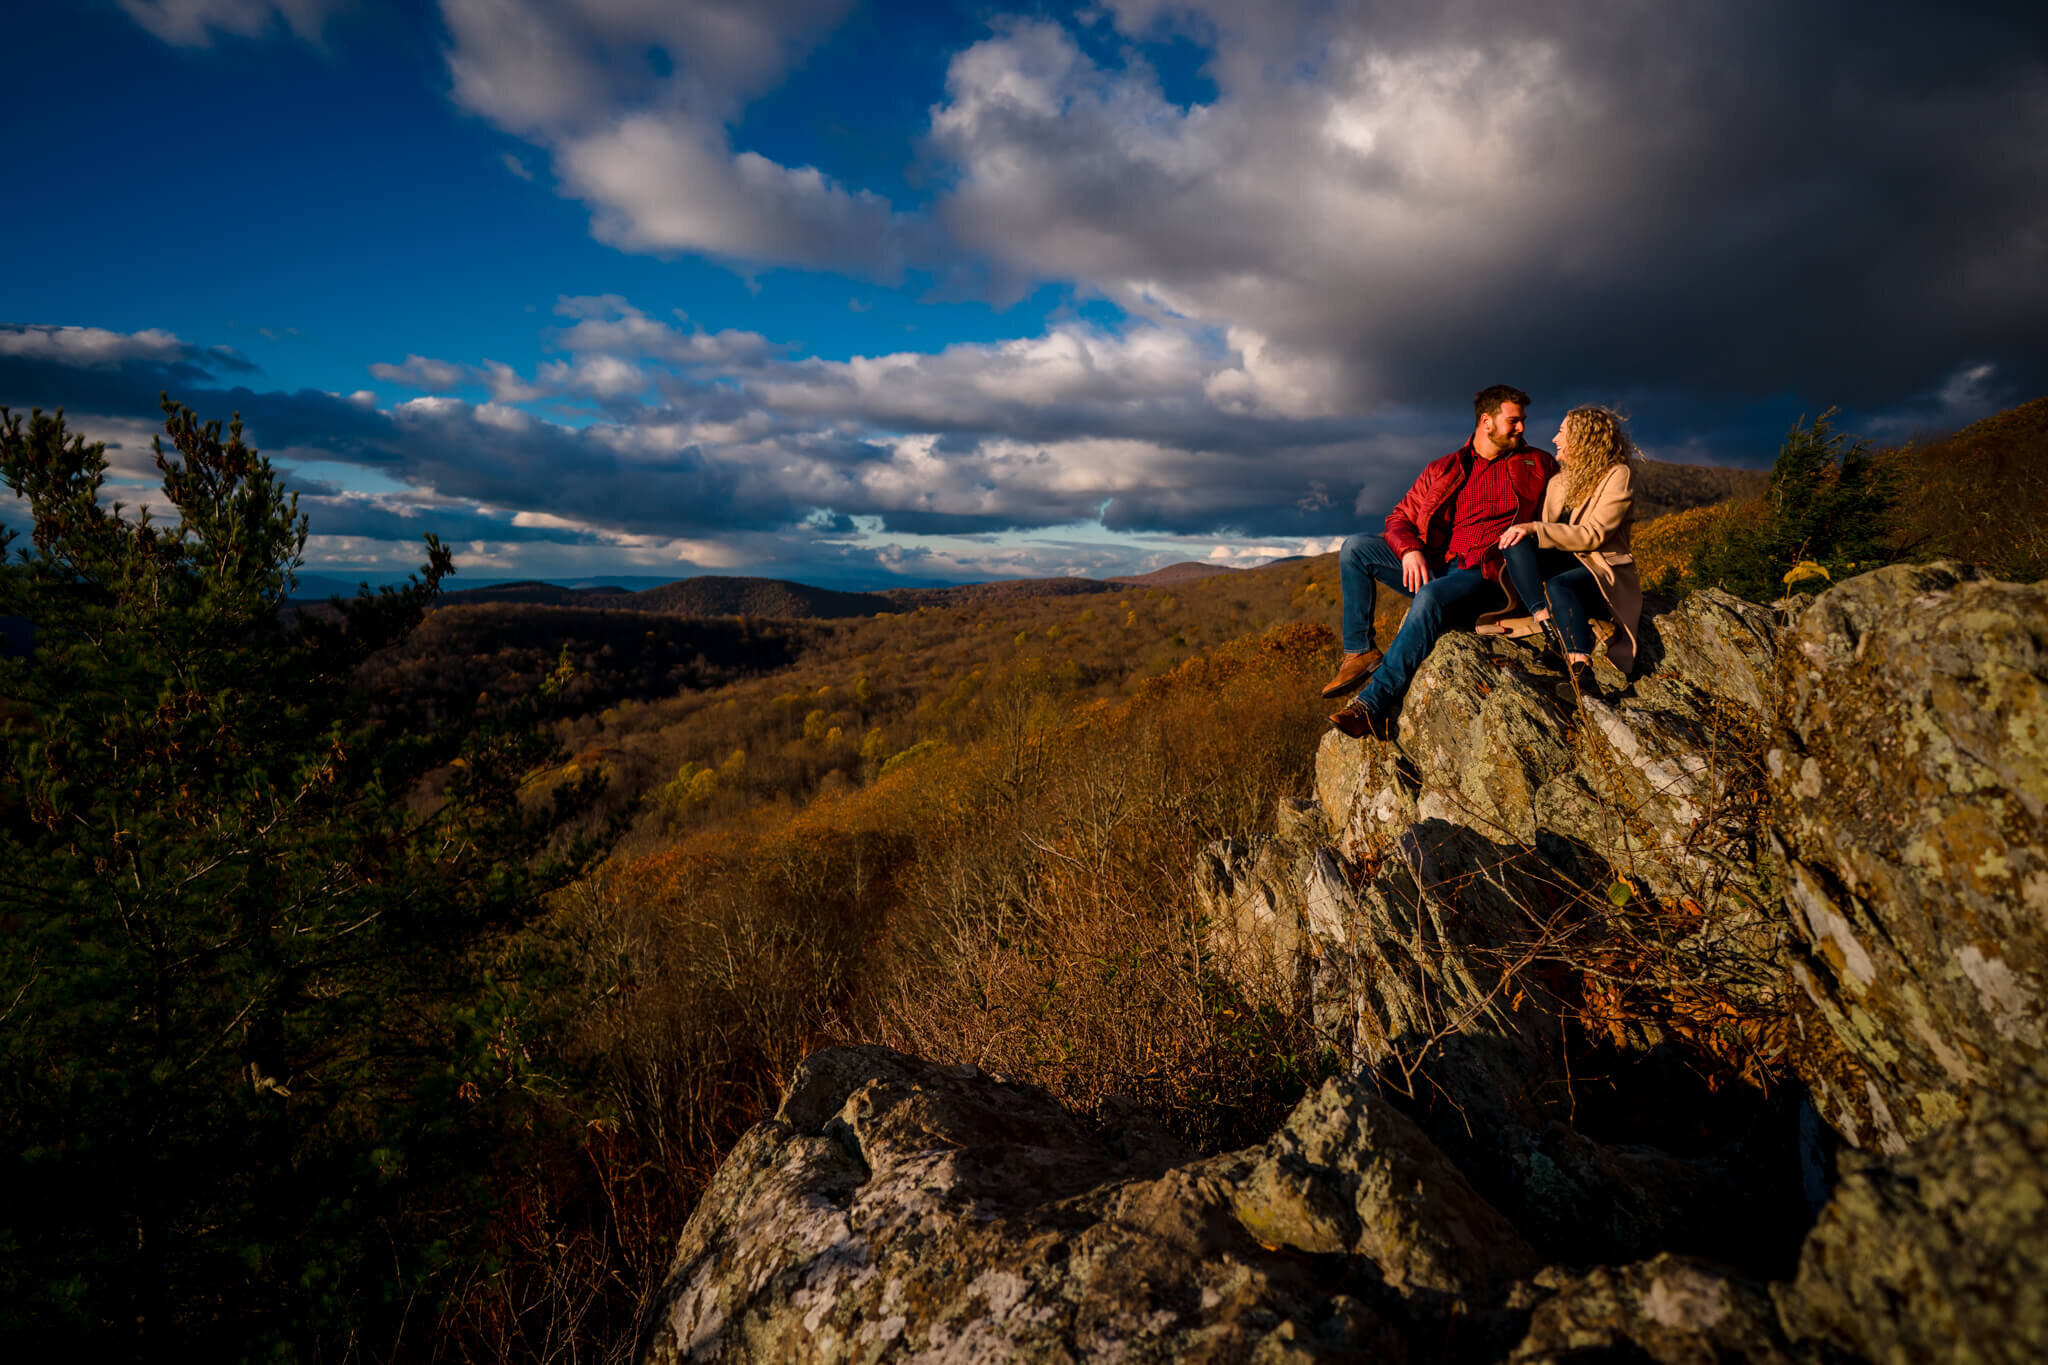 Surprise-Proposal-The-Point-Overlook-Shenandoah-National-Park-Photography-by-Bee-Two-Sweet-80.jpg